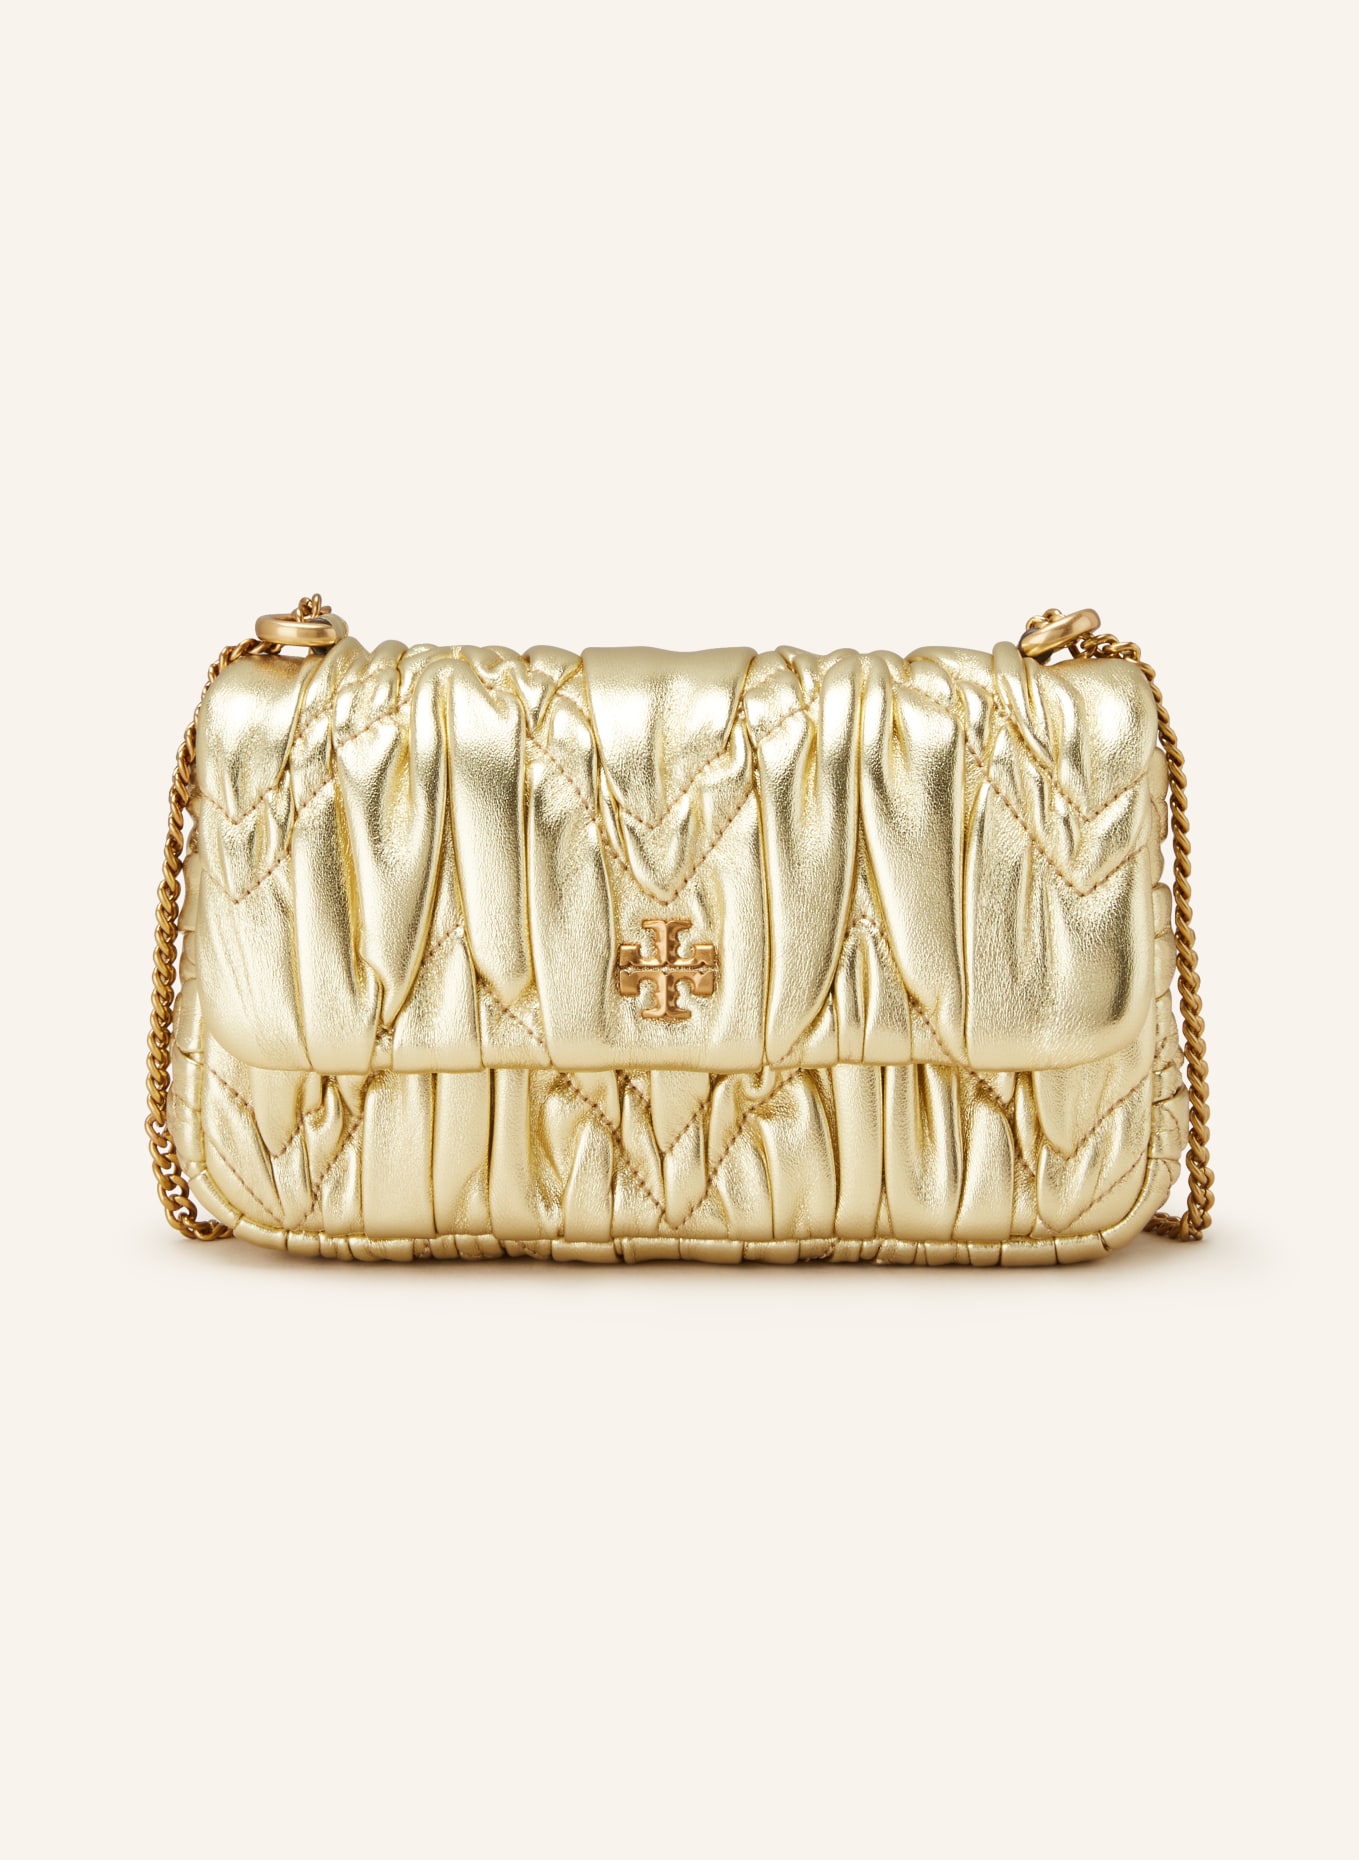 Tory Burch Crossbody Bags | The RealReal